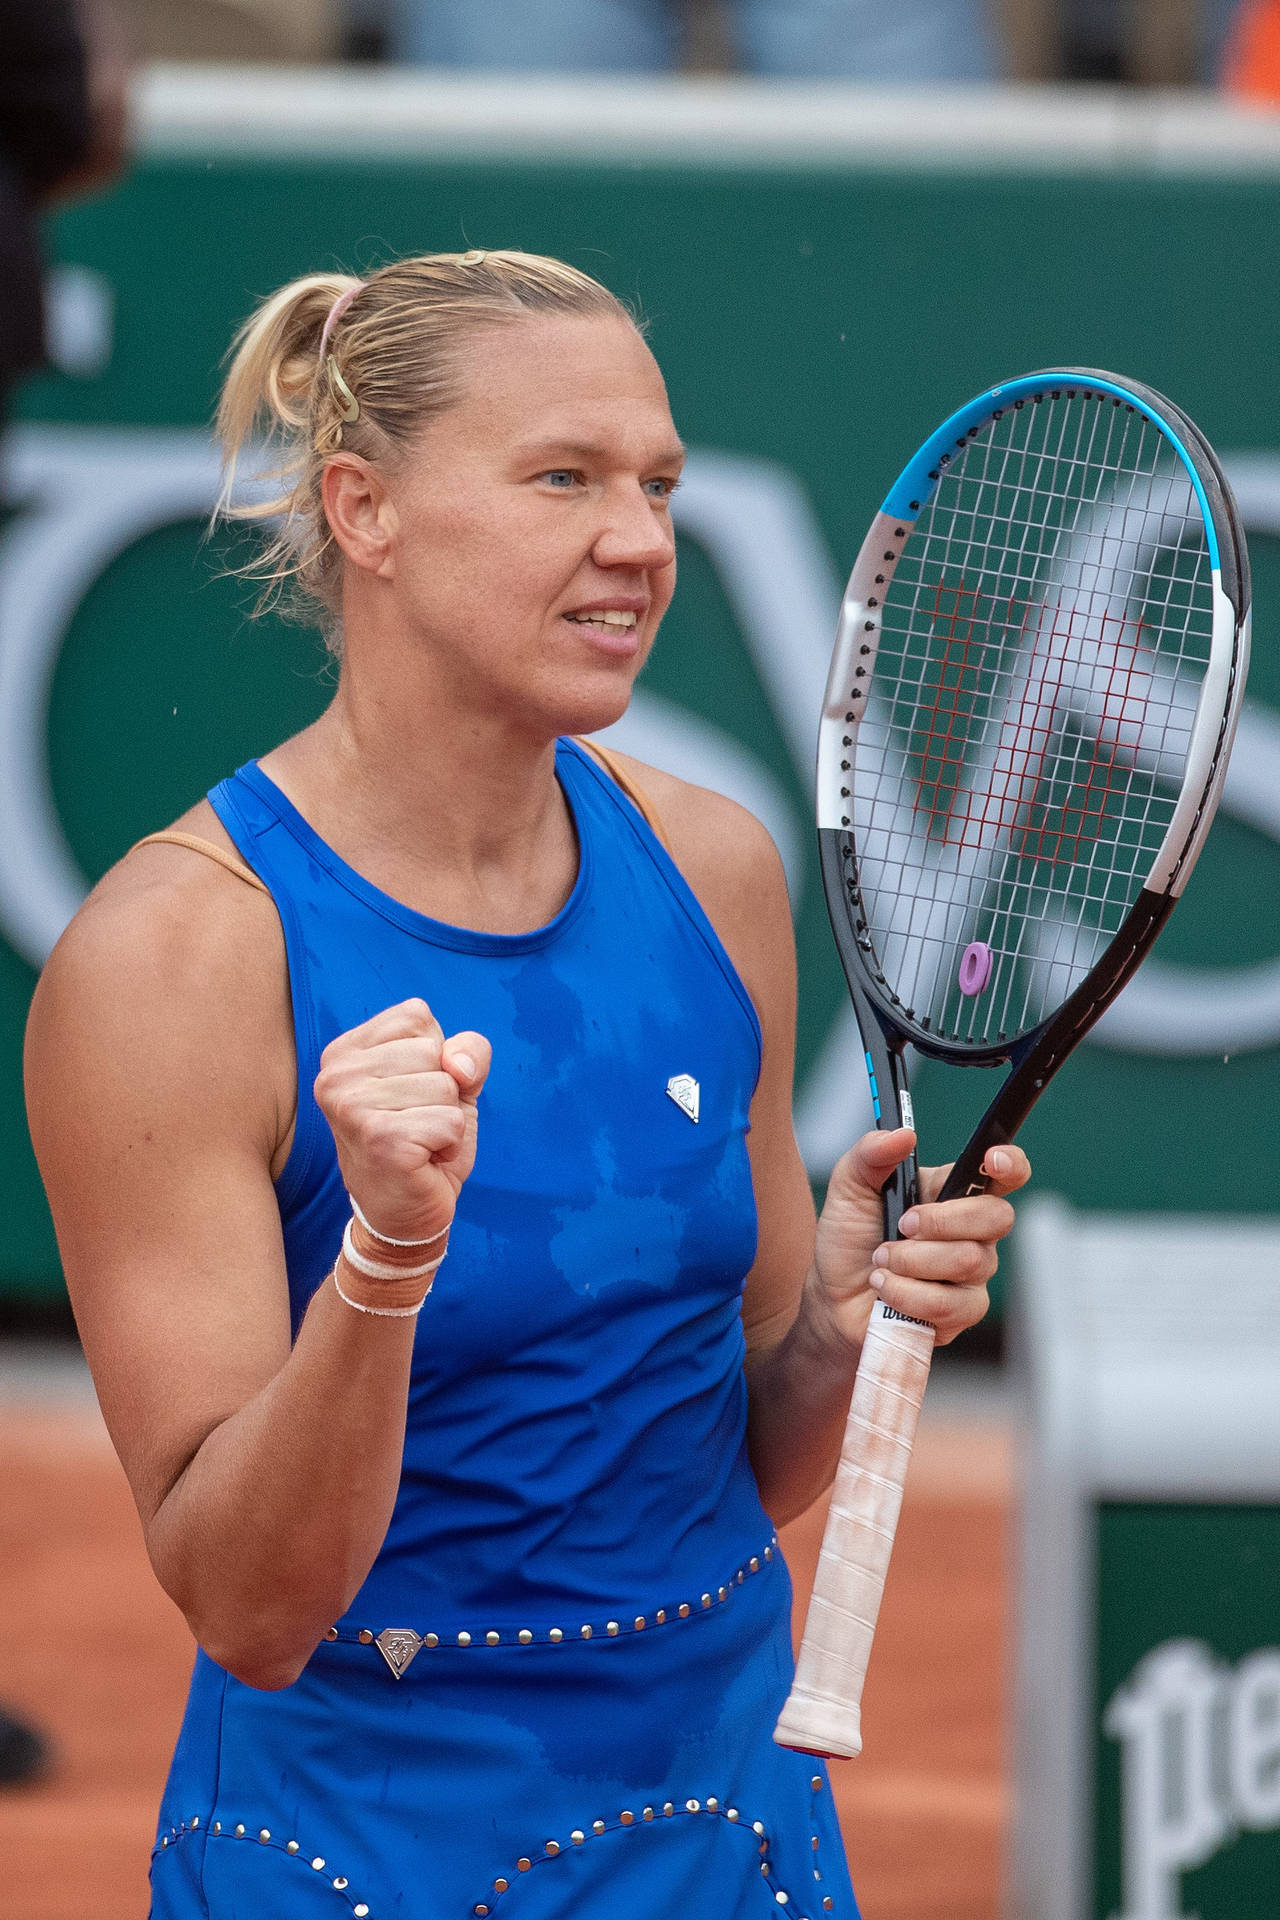 Exhilarating victory moment of Kaia Kanepi in a tennis match Wallpaper